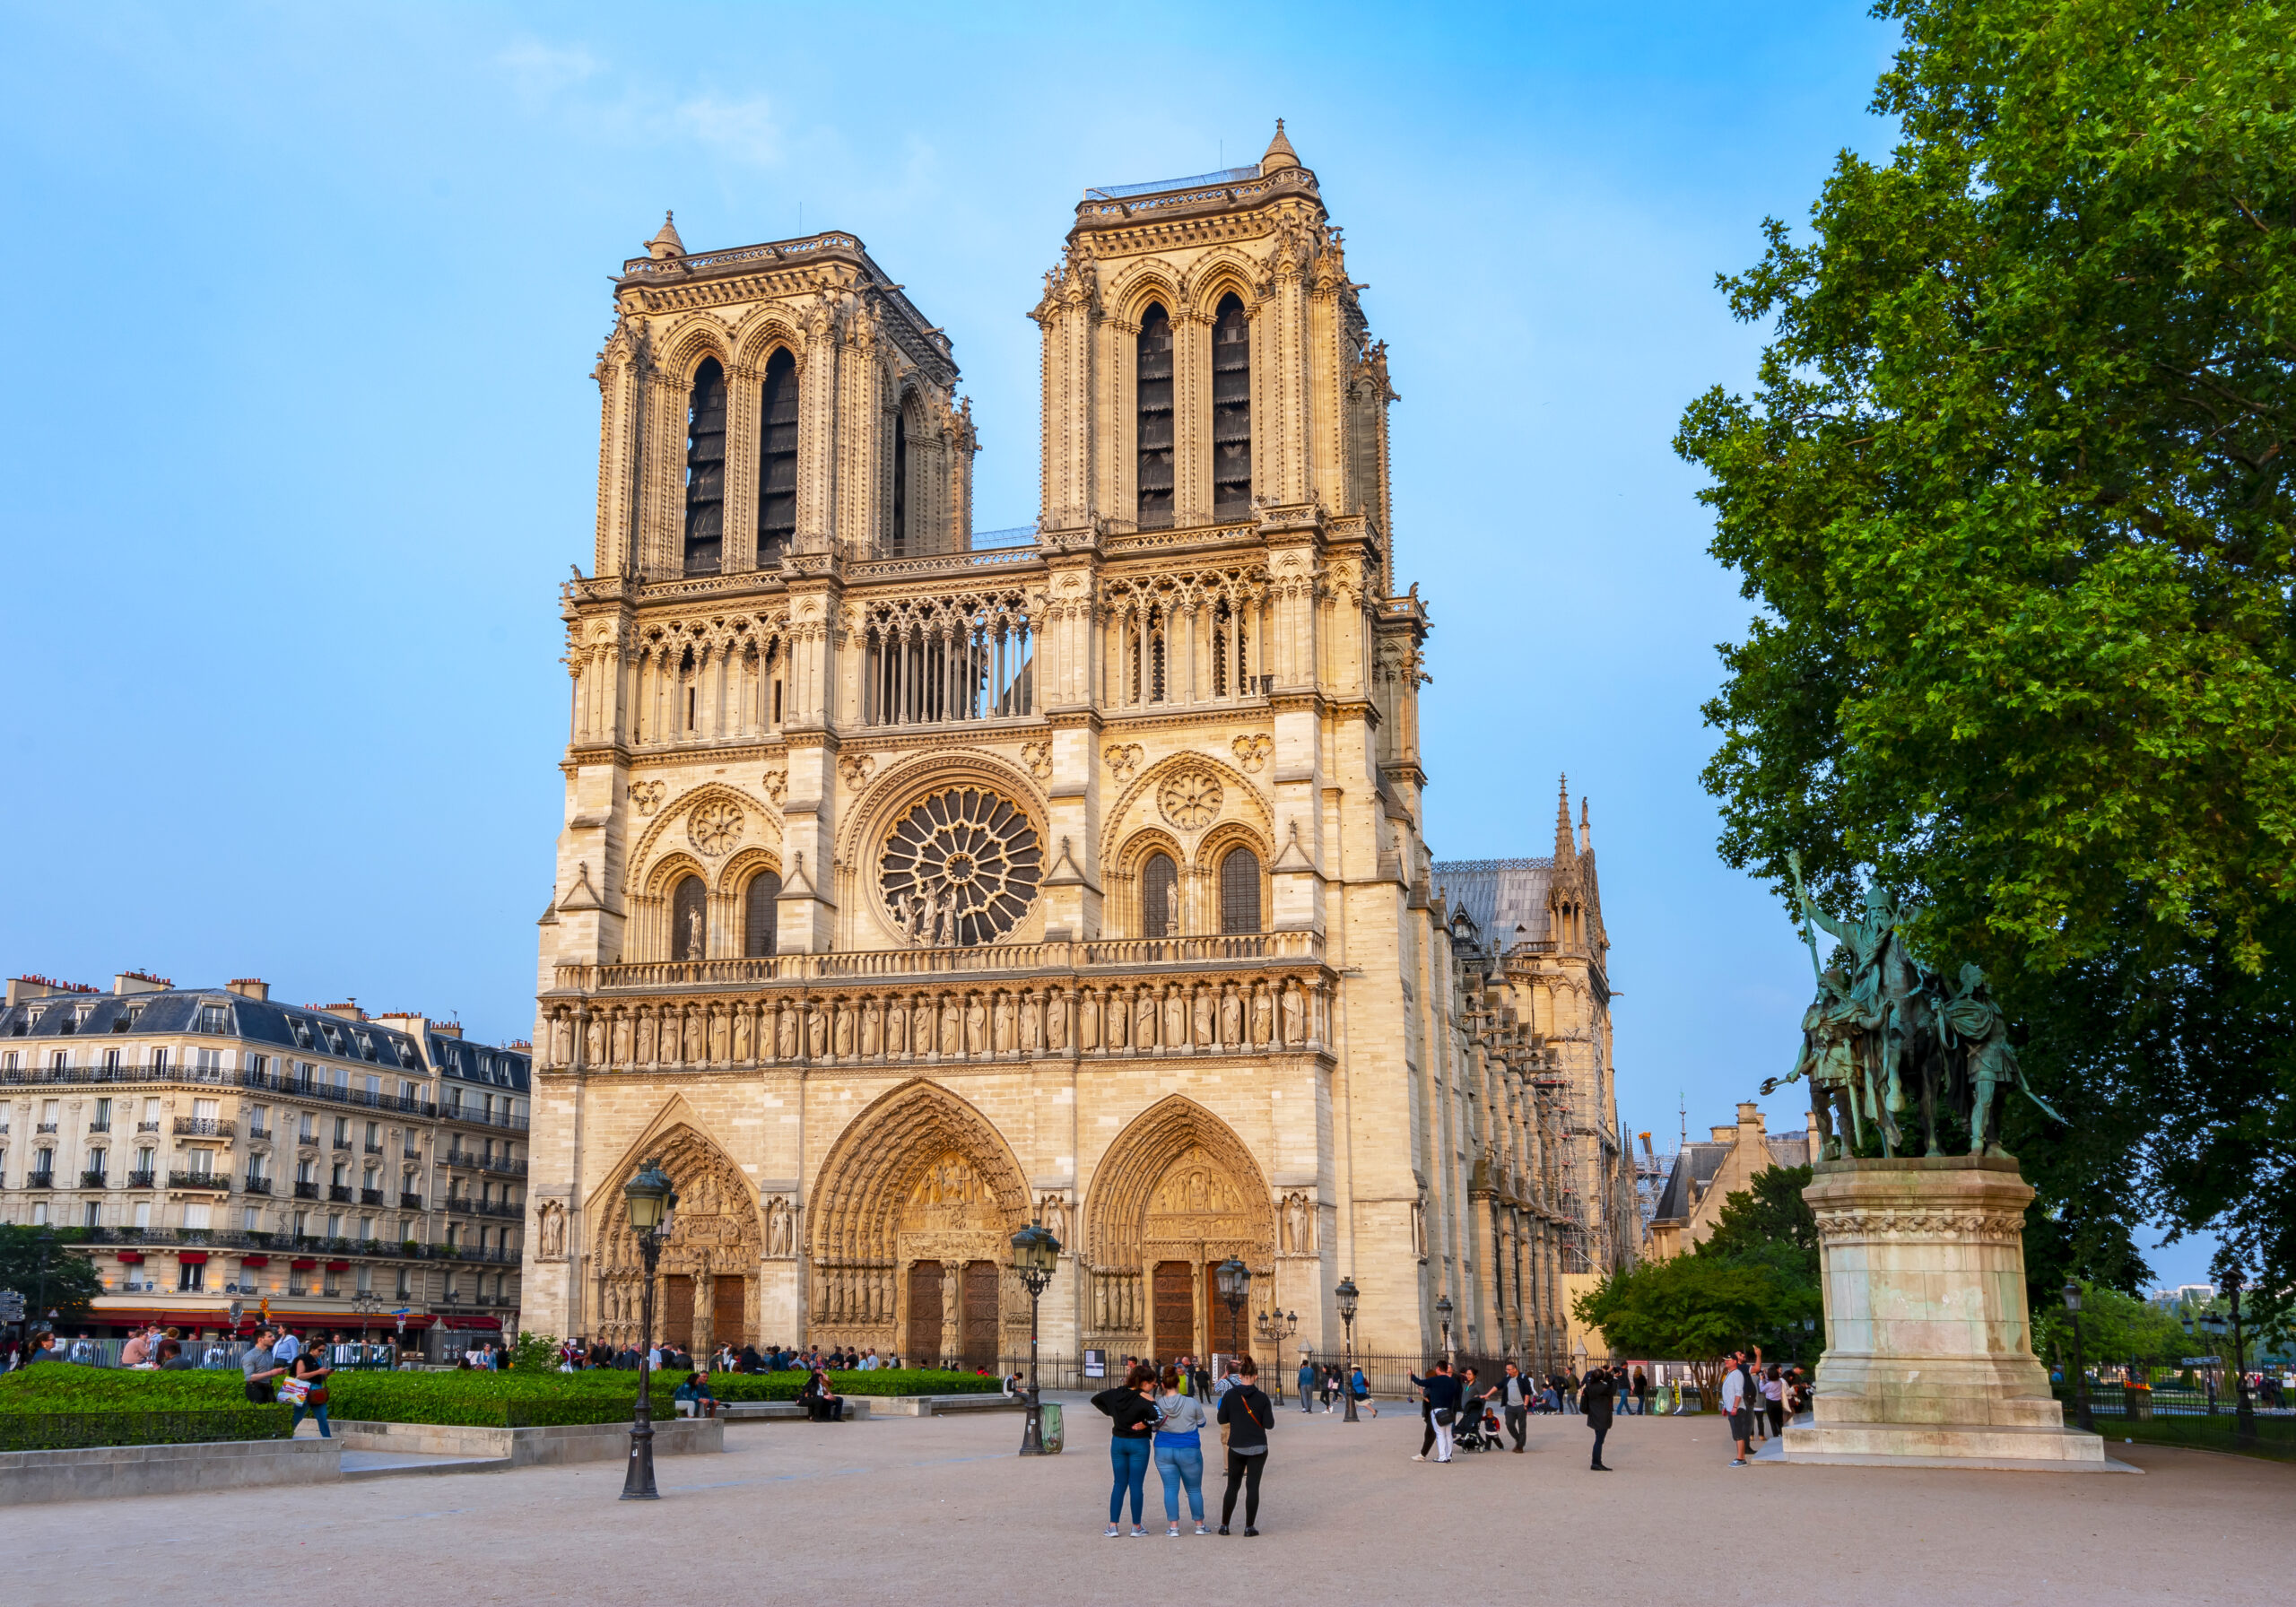 A Parisian landmark not to be missed on your vacation